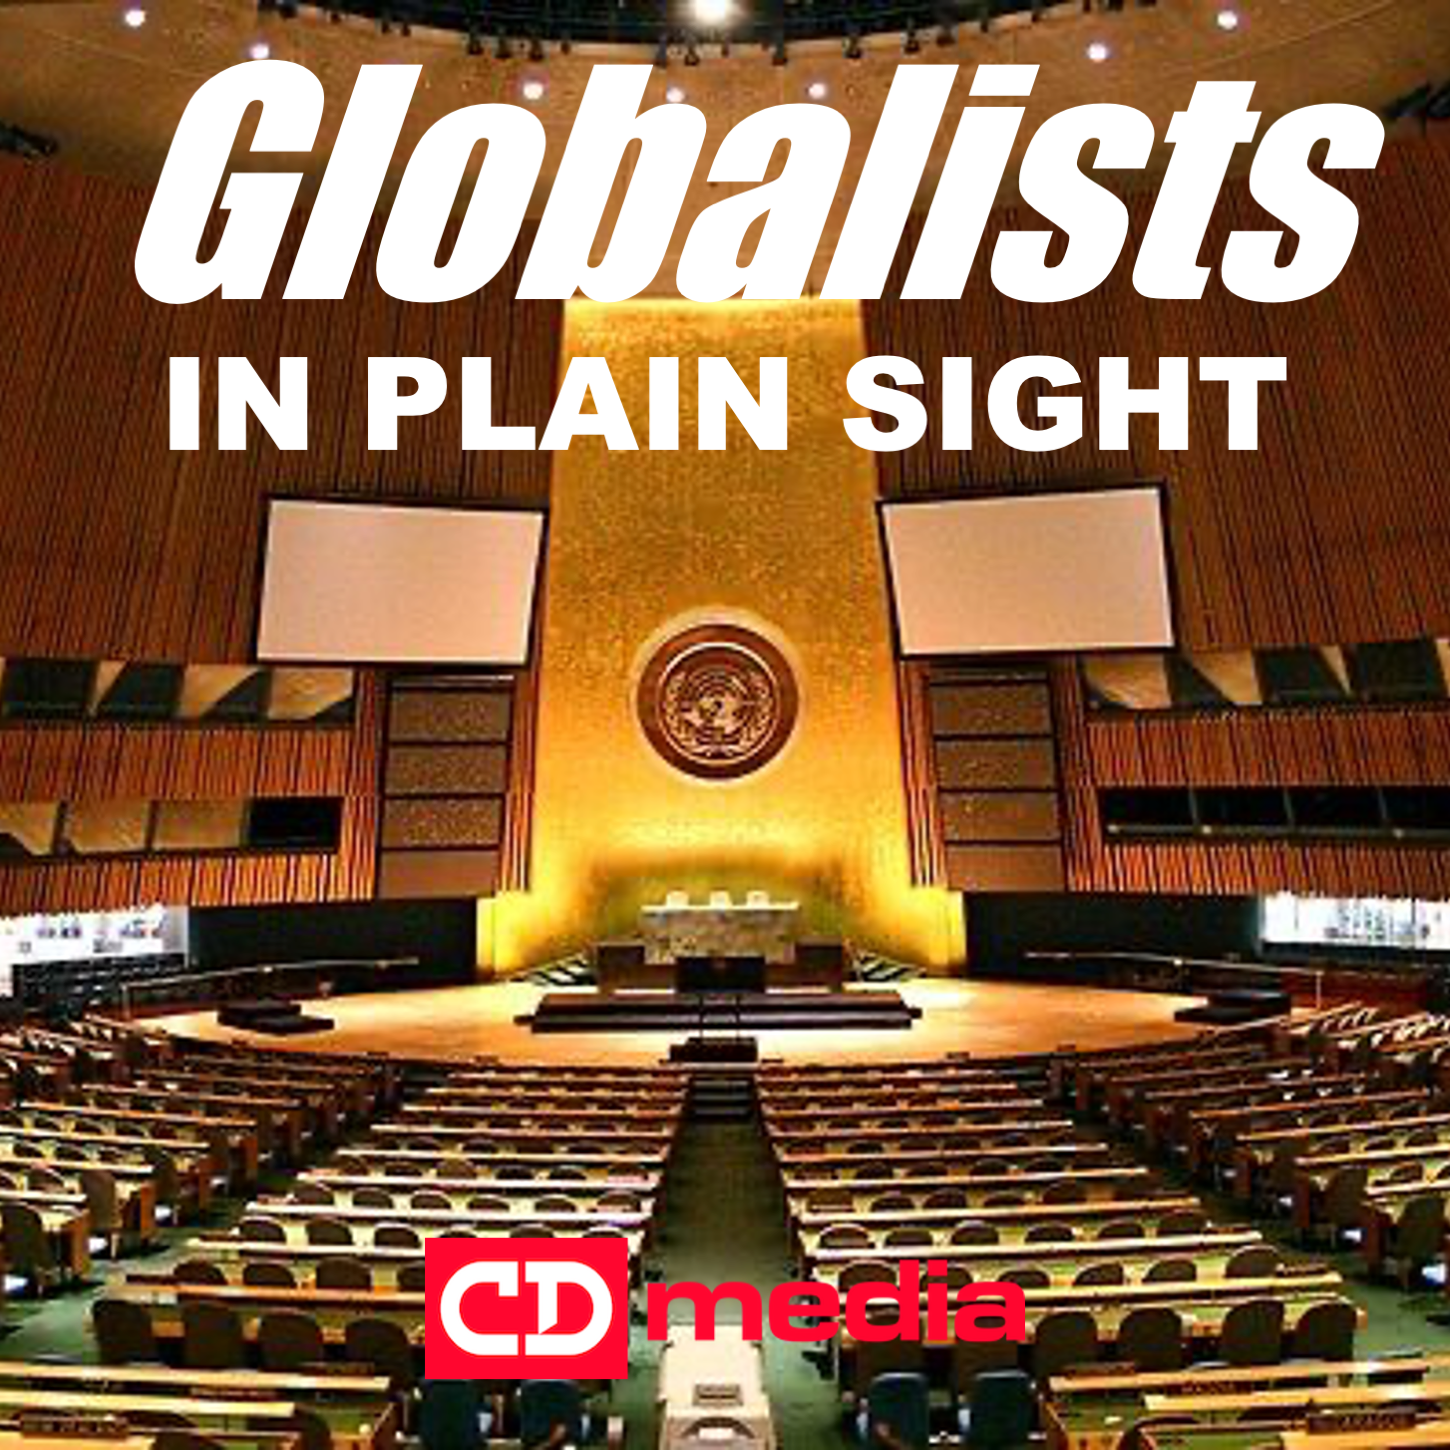 The Globalists In Plain Sight - Dr. Meryl Nass, David Bell - WHO Tyranny 3/24/24